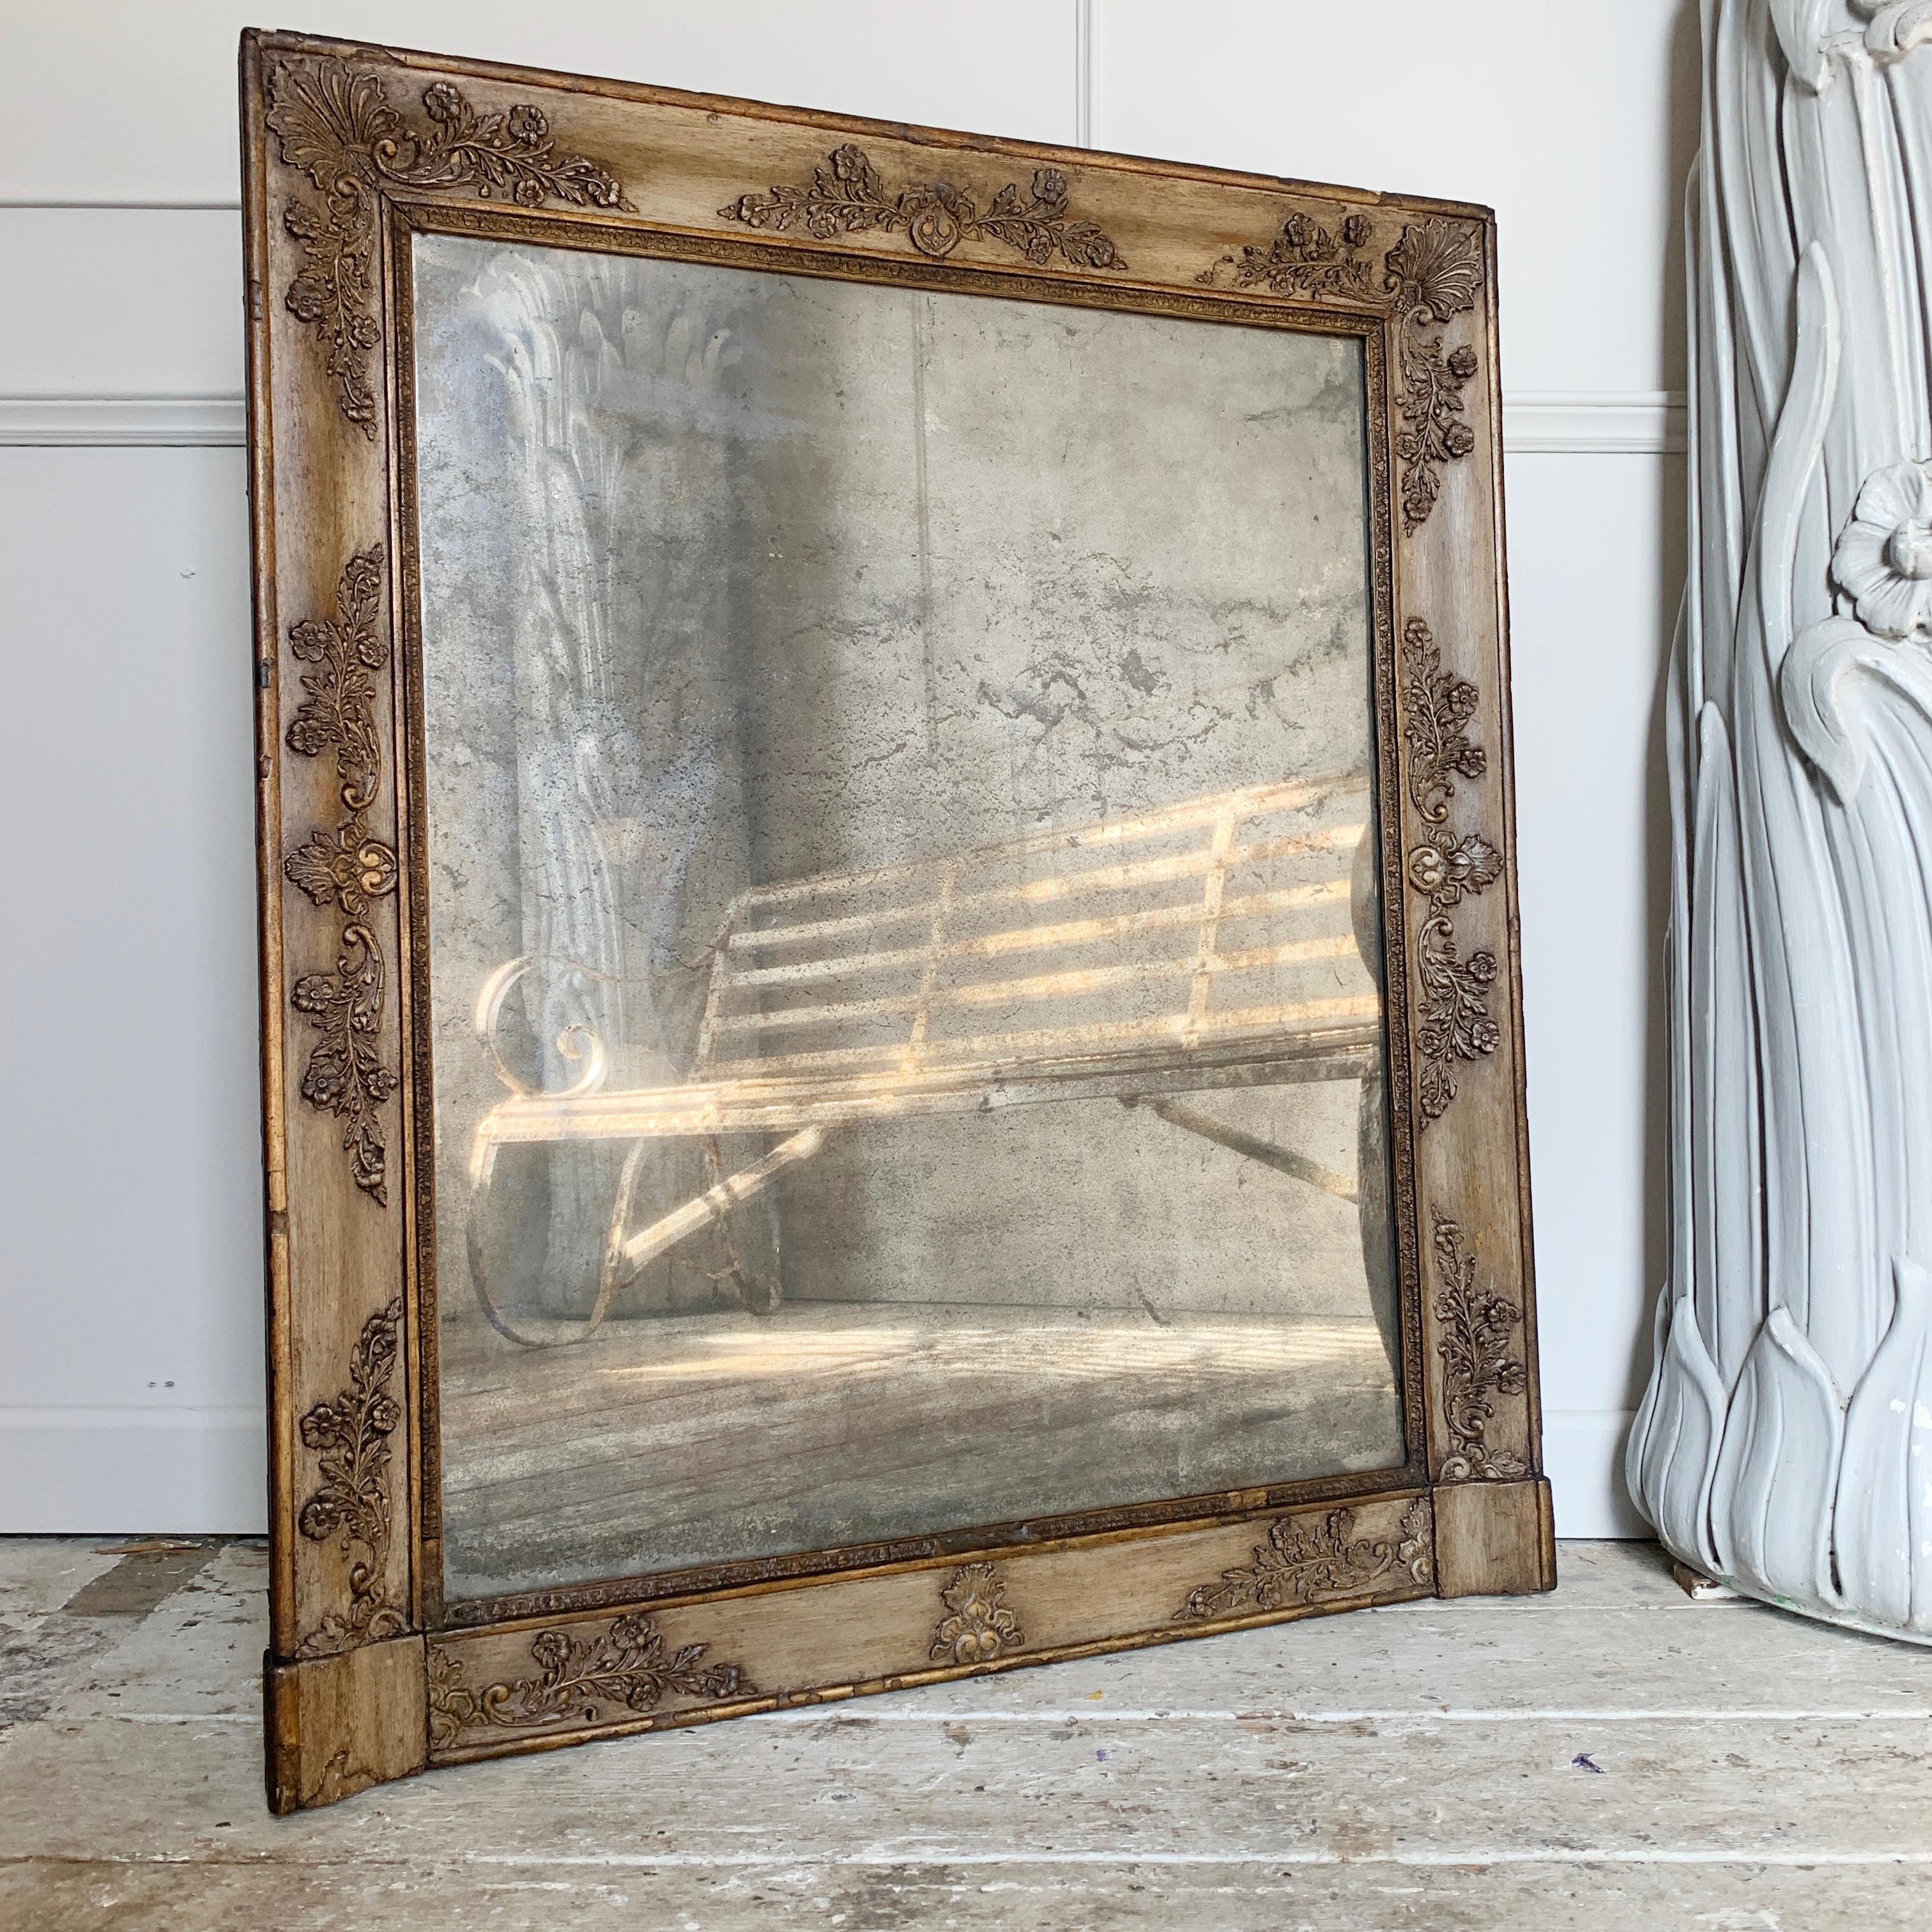 Antique French carved wood and gilt overmantle mirror.
Early 19th century, with original foxed mercury plate
Superb mirror, in untouched original condition, an excellent interiors piece of impressive proportions
Measures: 99cm height, 85cm width,